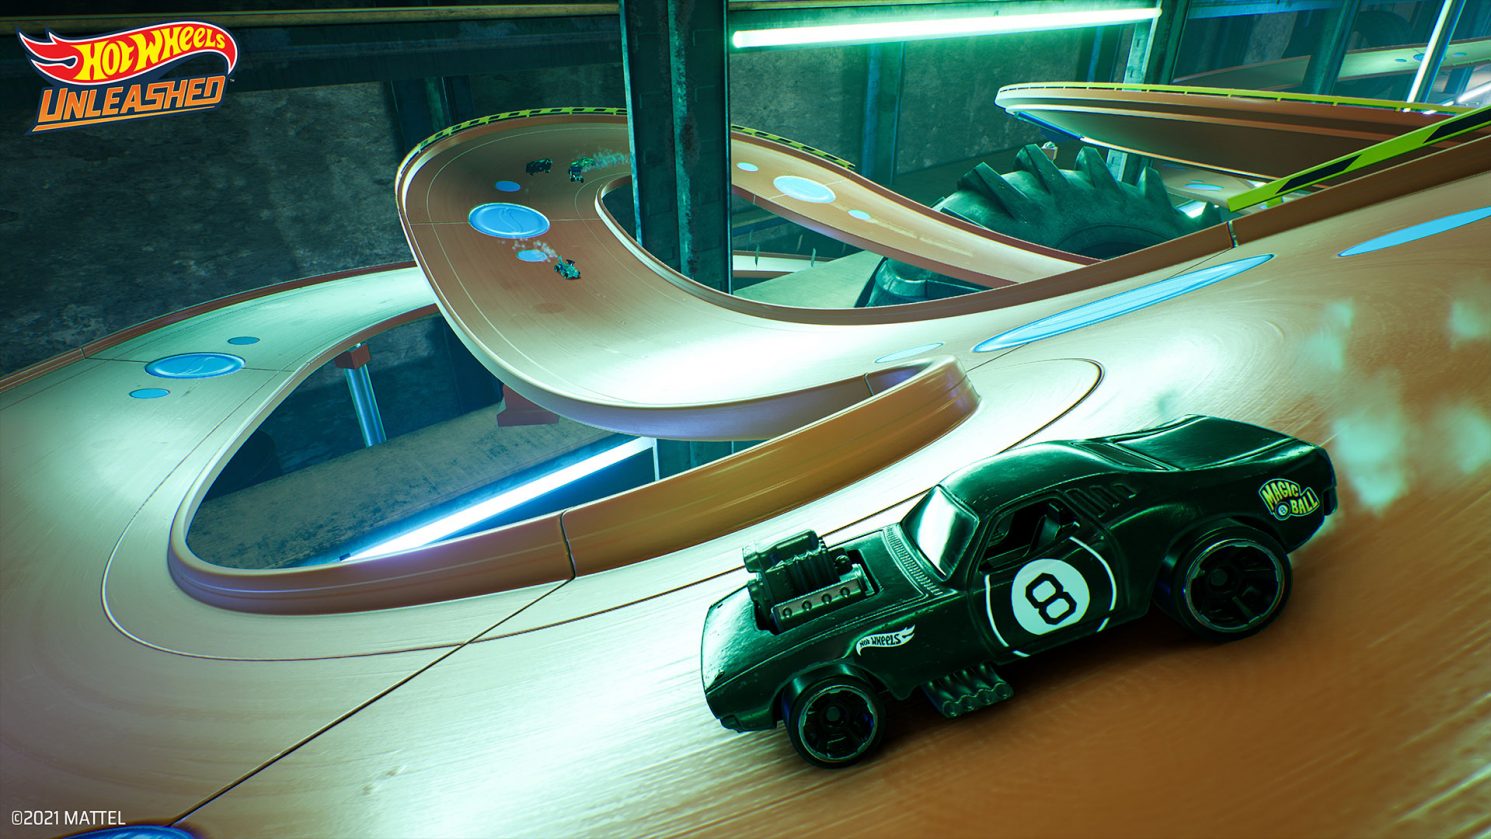 download free hot wheels unleashed ™